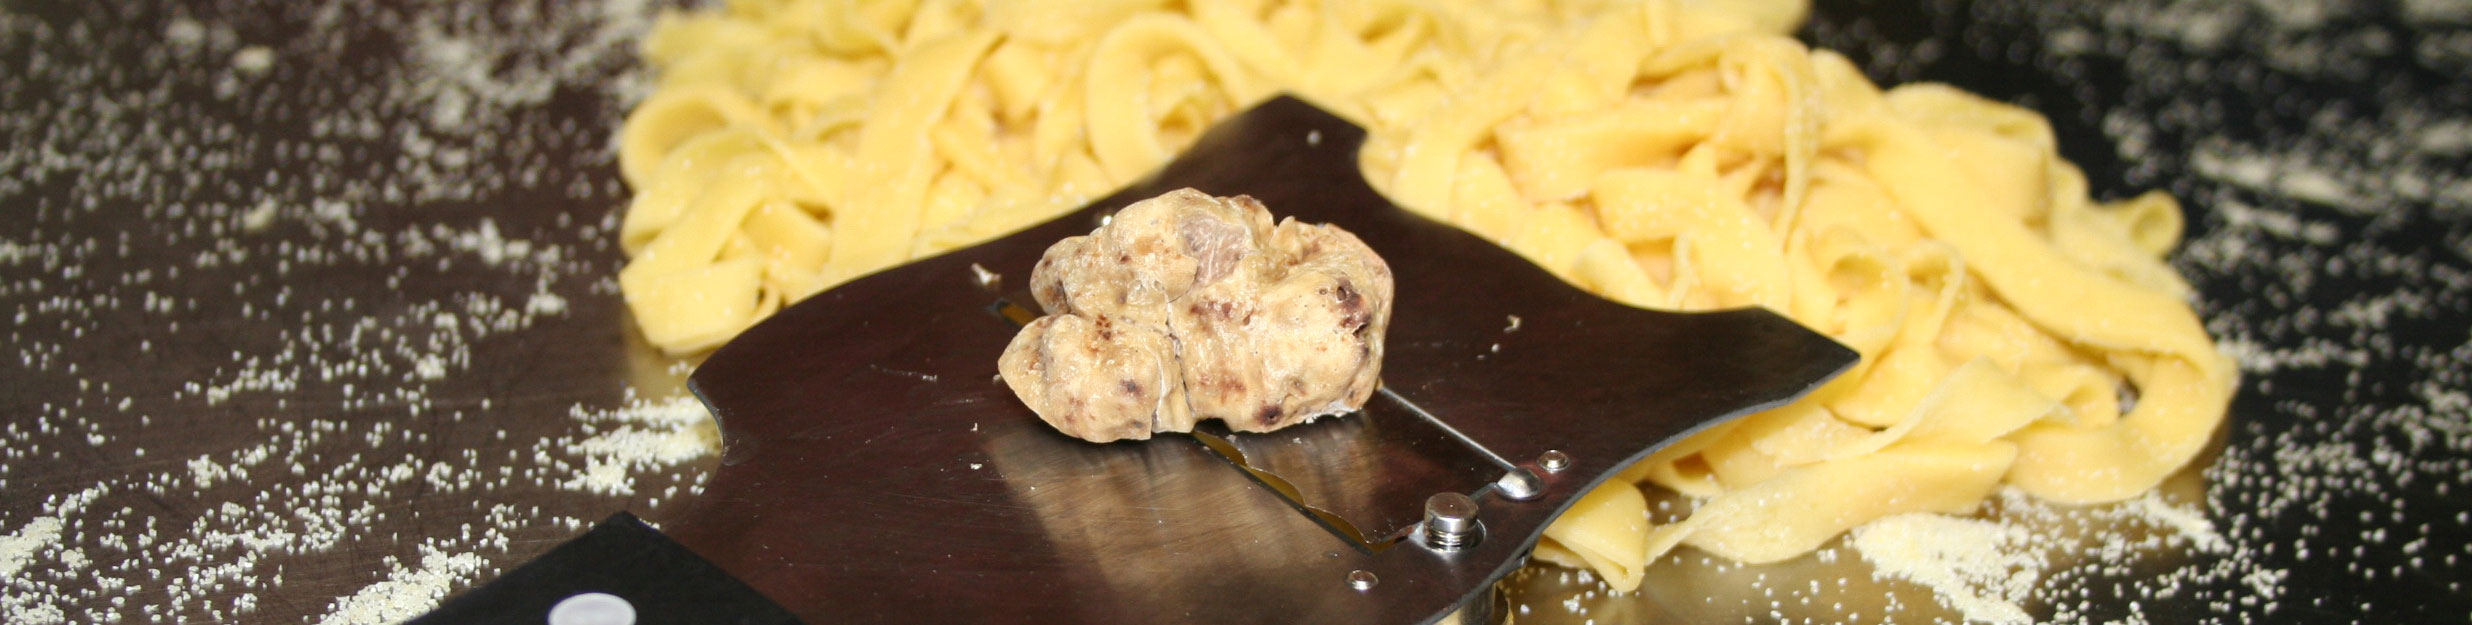 Truffle Cooking Course Marche Italy